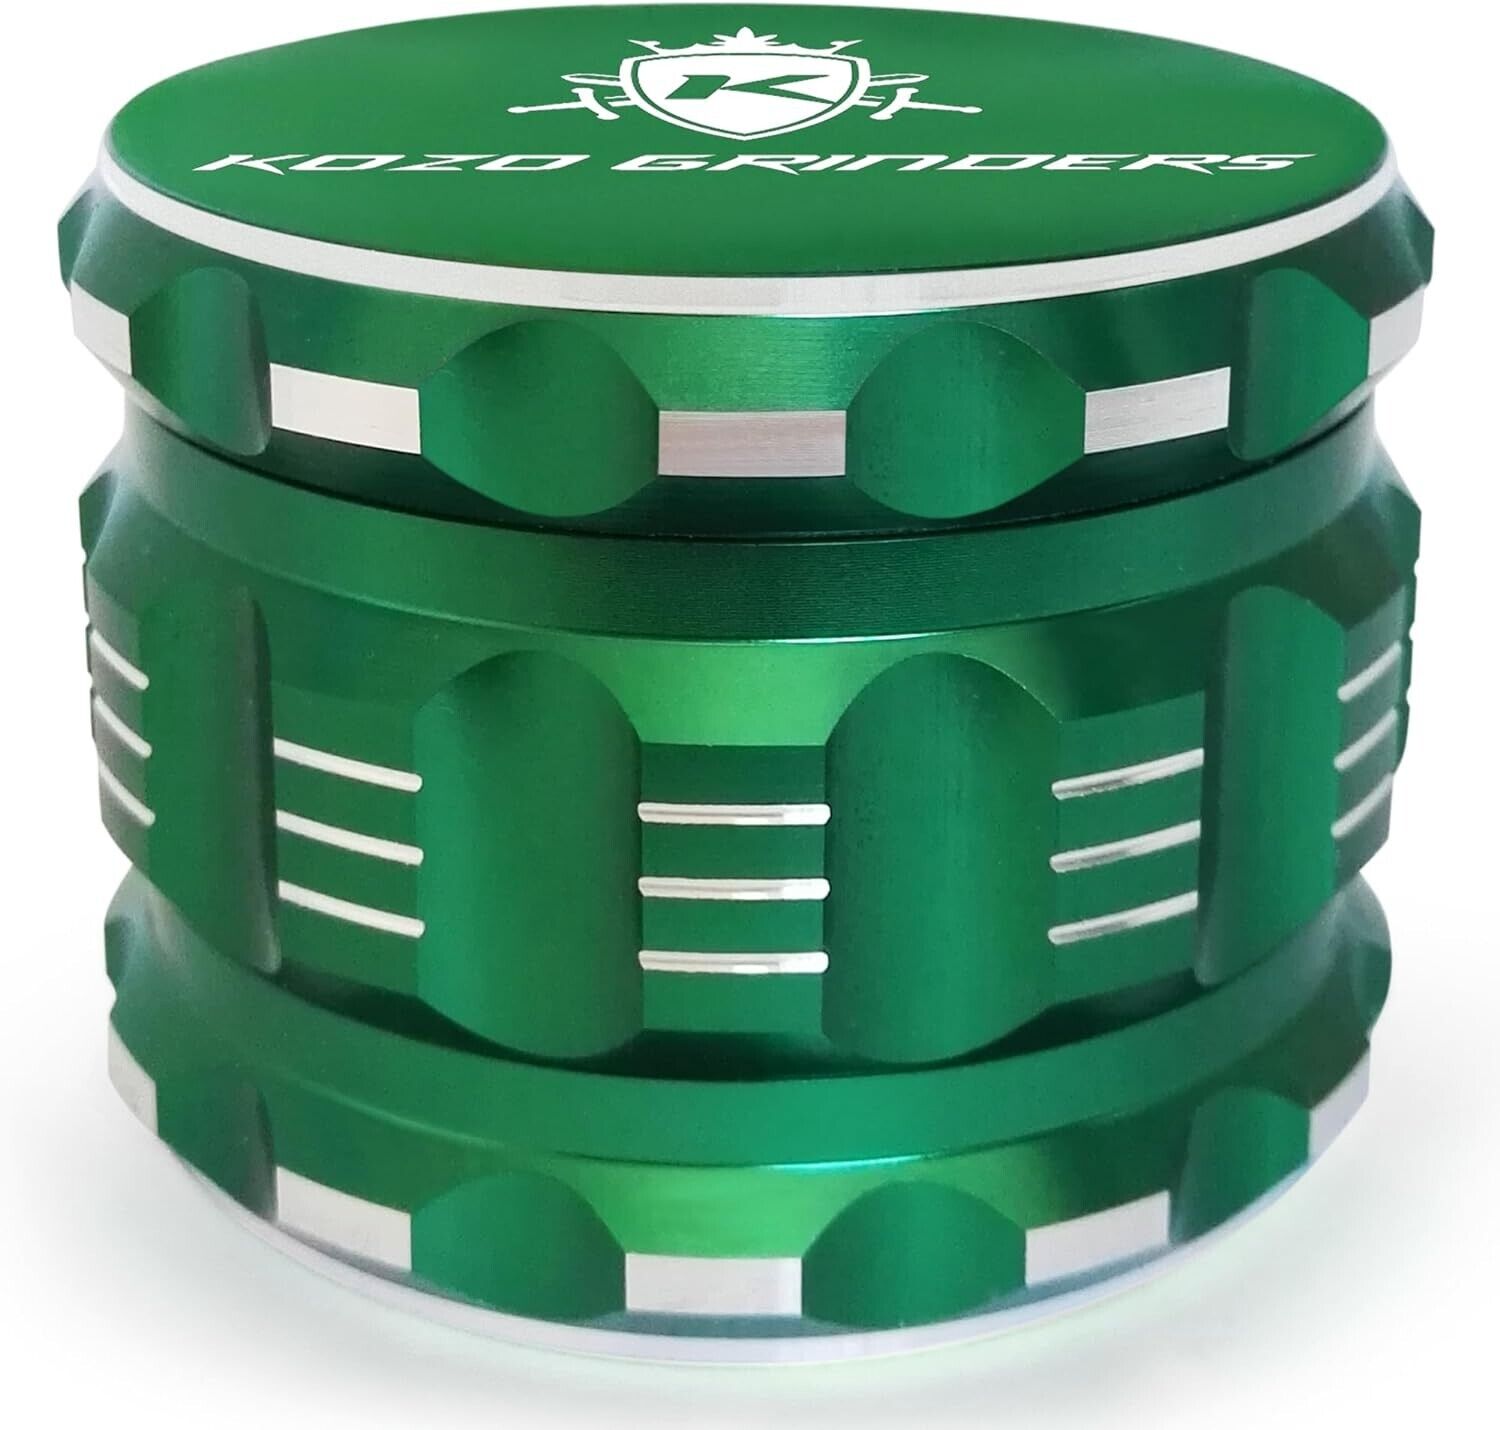 Kozo Grinders Best Herb Grinder Large 4 Piece, 2.5in Green Anodized Aluminum